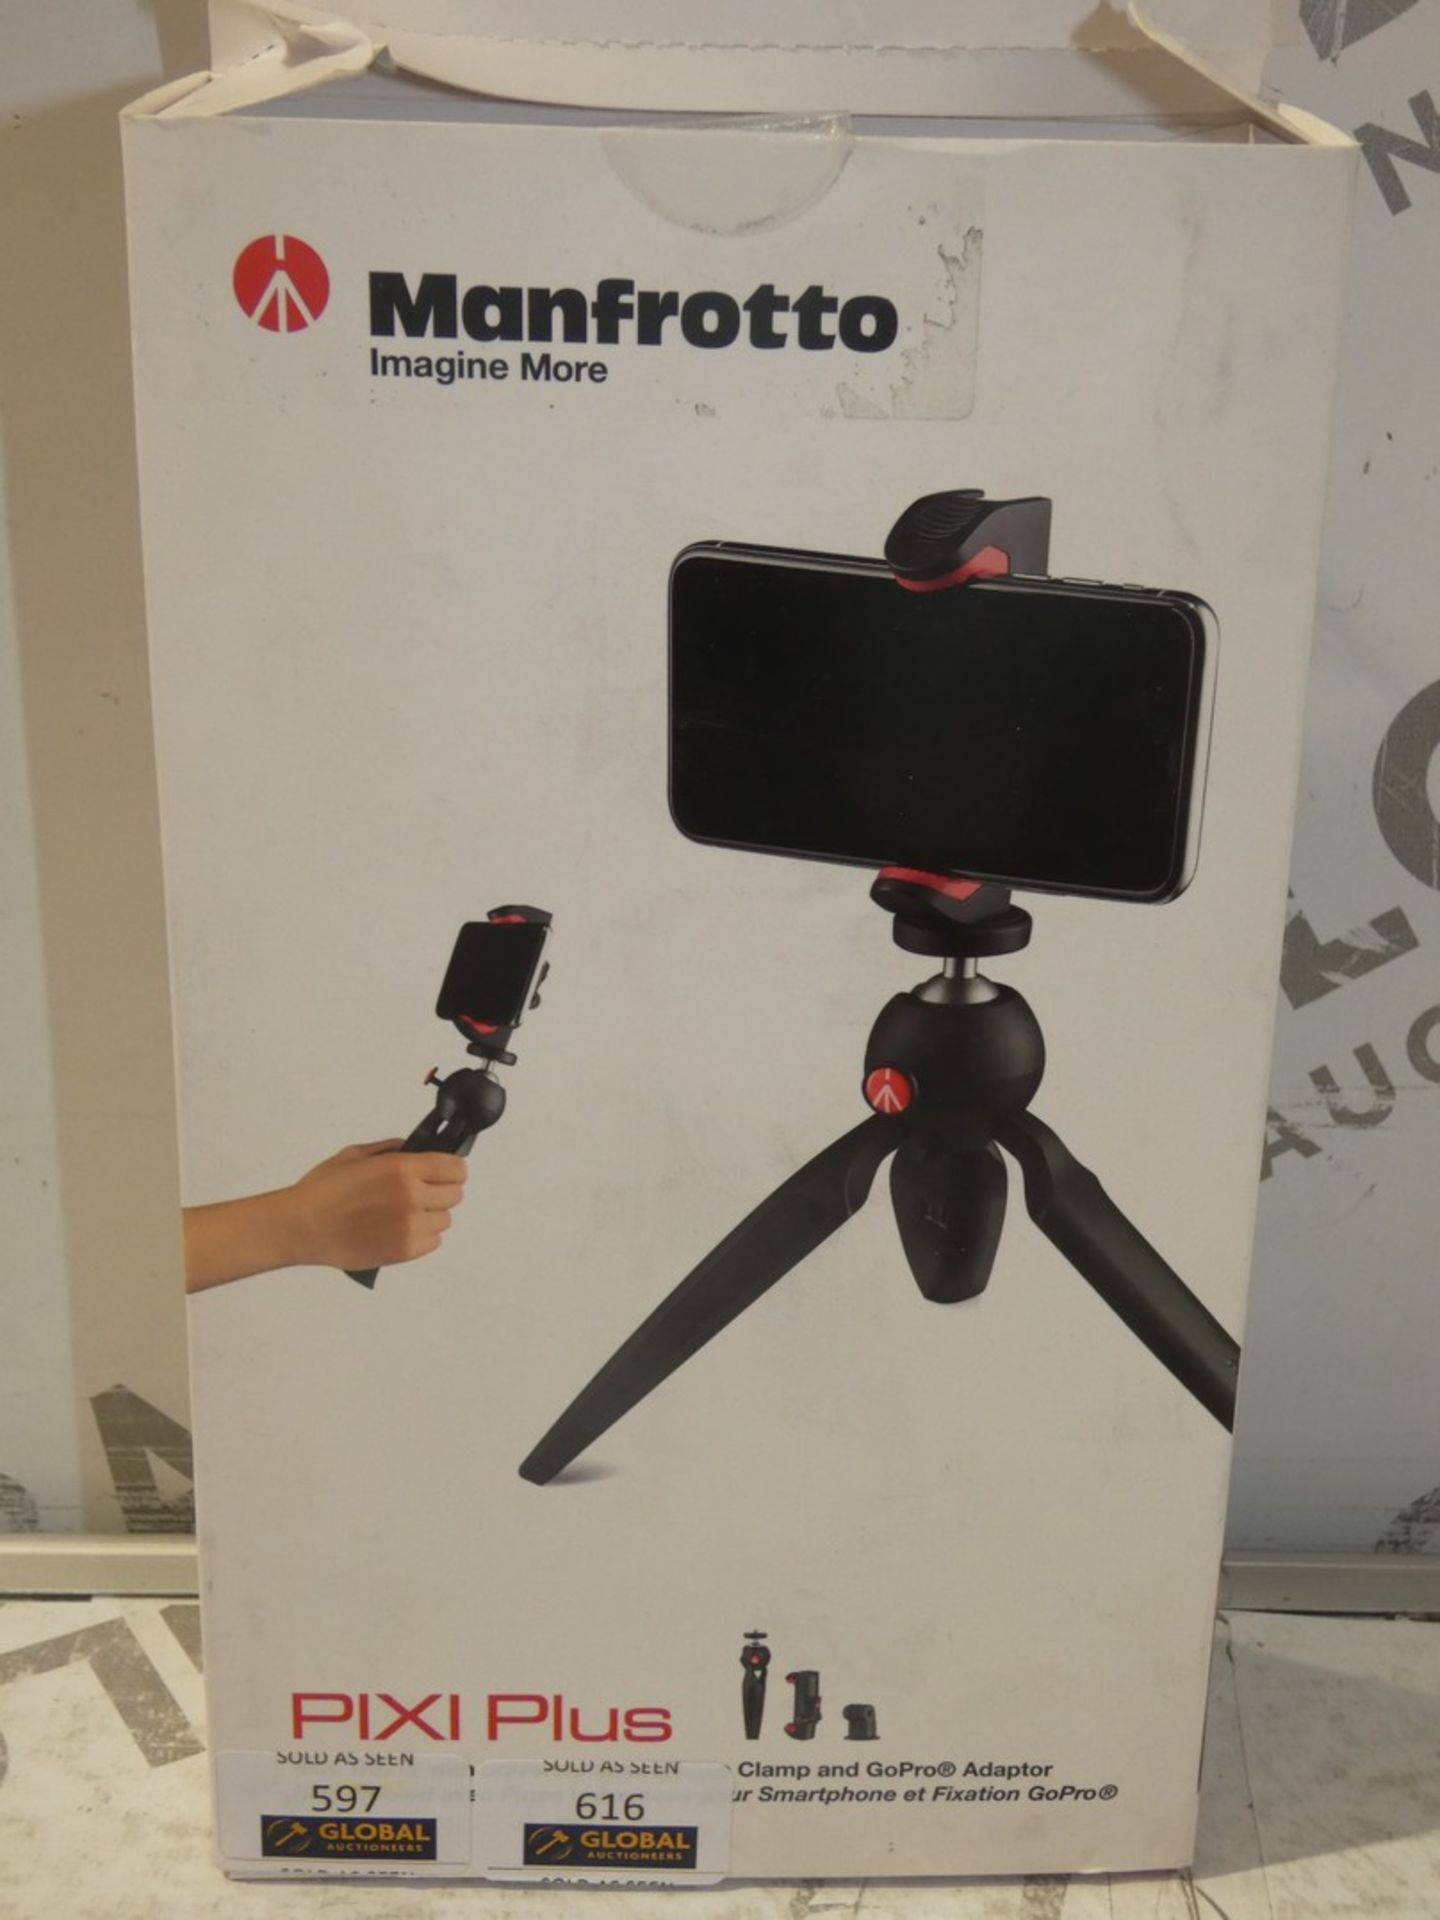 Boxed Pixie Plus Manfrotto Tripods RRP £40 Each (Viewings And Appraisals Are Highly Recommended)